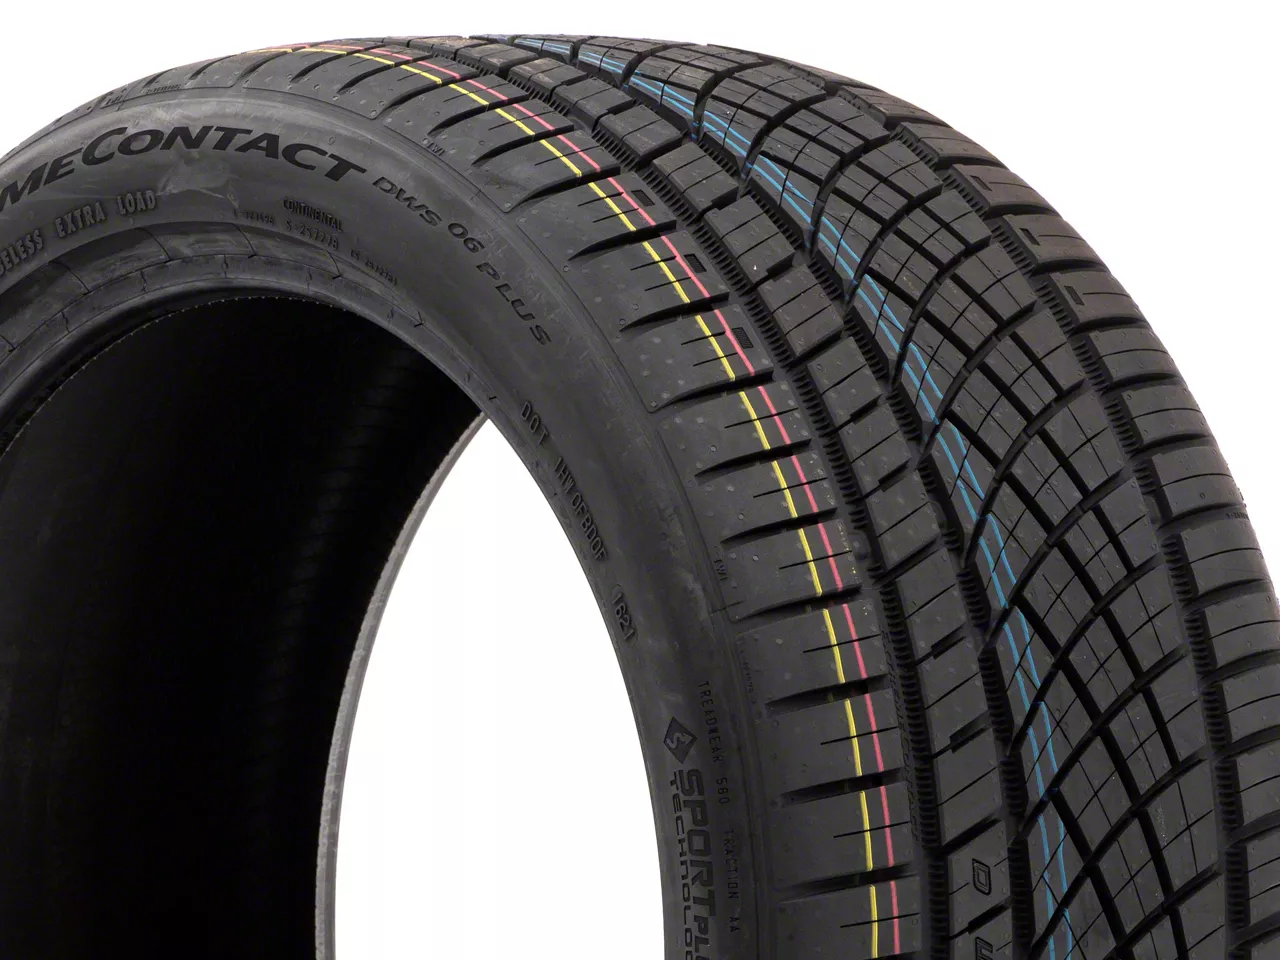 Continental Mach-E Extreme Contact DWS06 PLUS Tire 15573310000 (265/35R22)  - Free Shipping